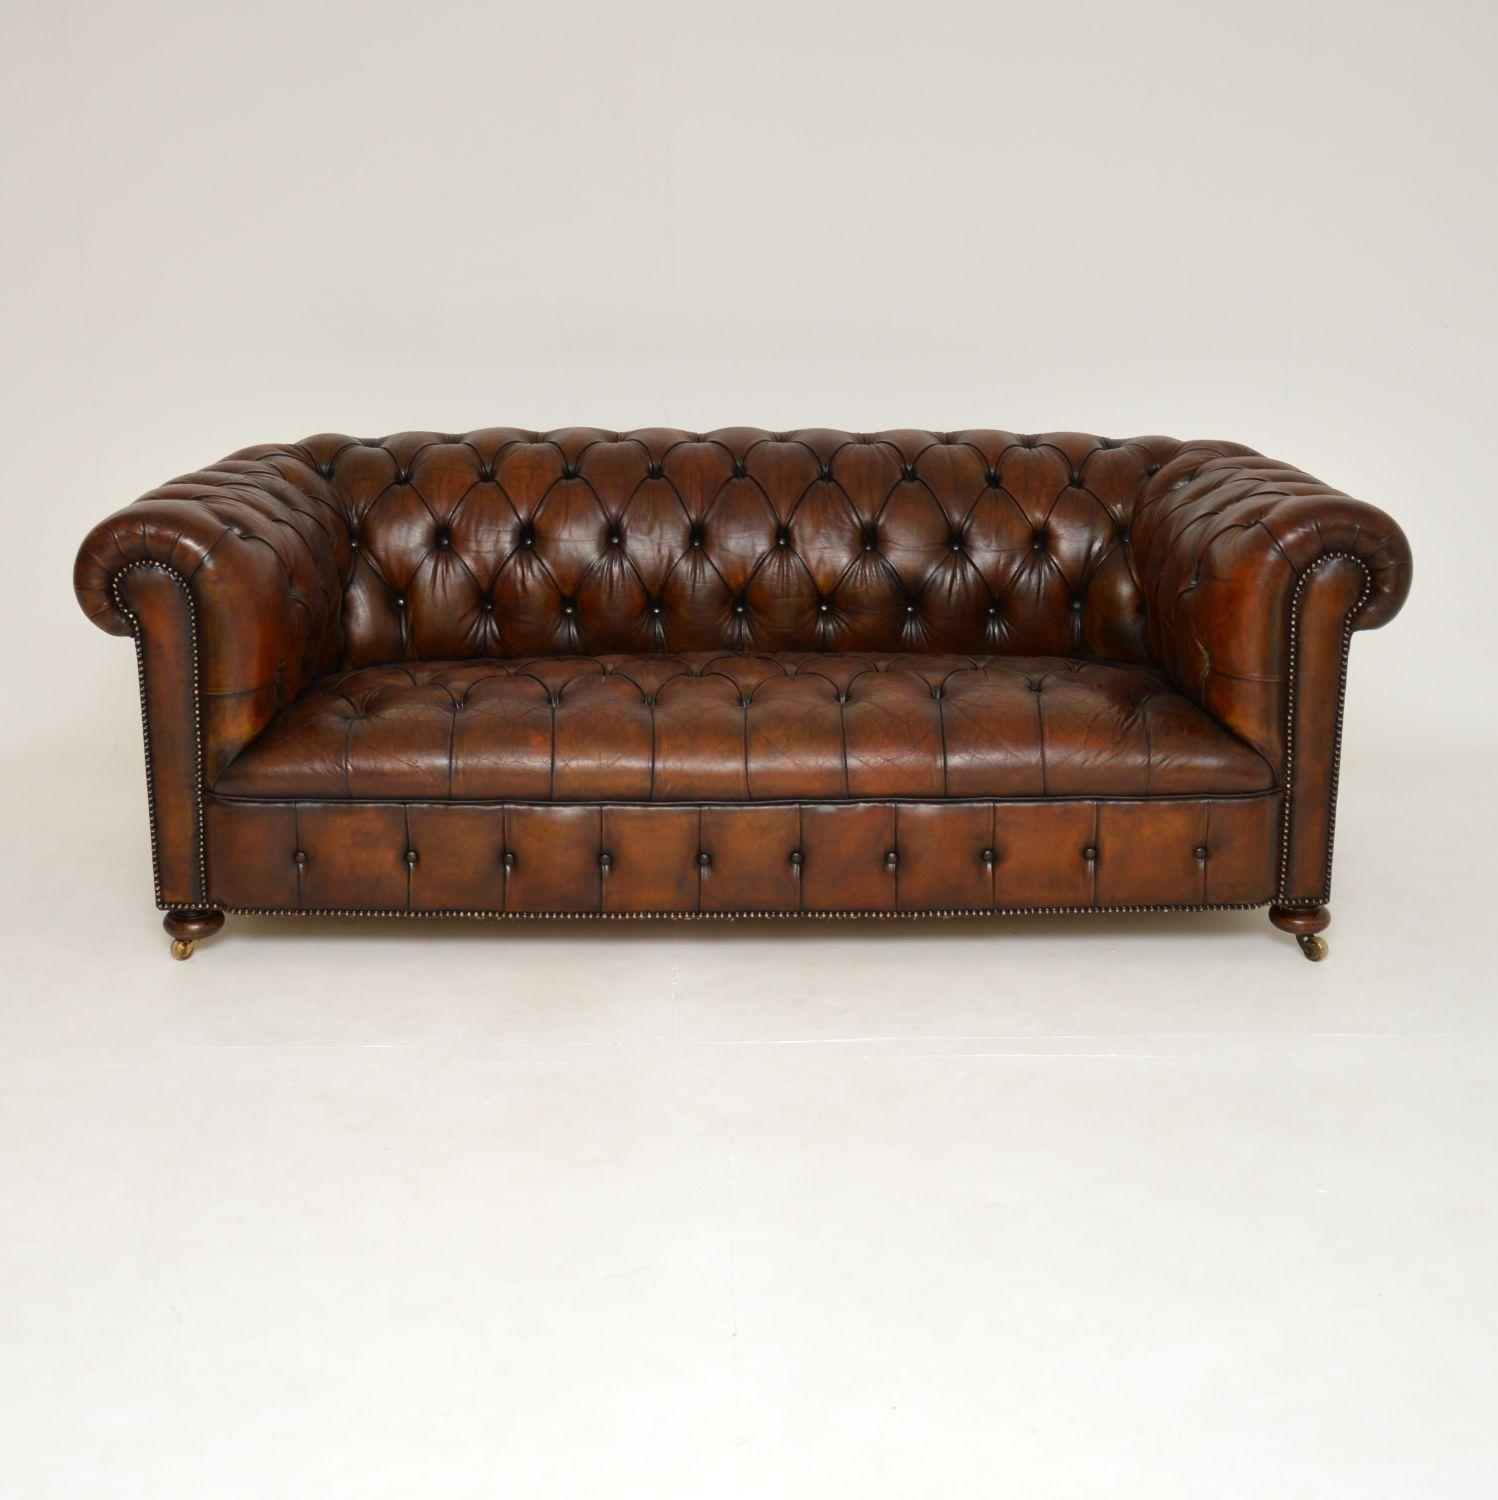 A fine example of an antique deep buttoned leather Chesterfield sofa. This was made in England, it dates from around the 1930’s.

The quality is amazing, this would have been hand made to the highest standards. It has a very generous seating area